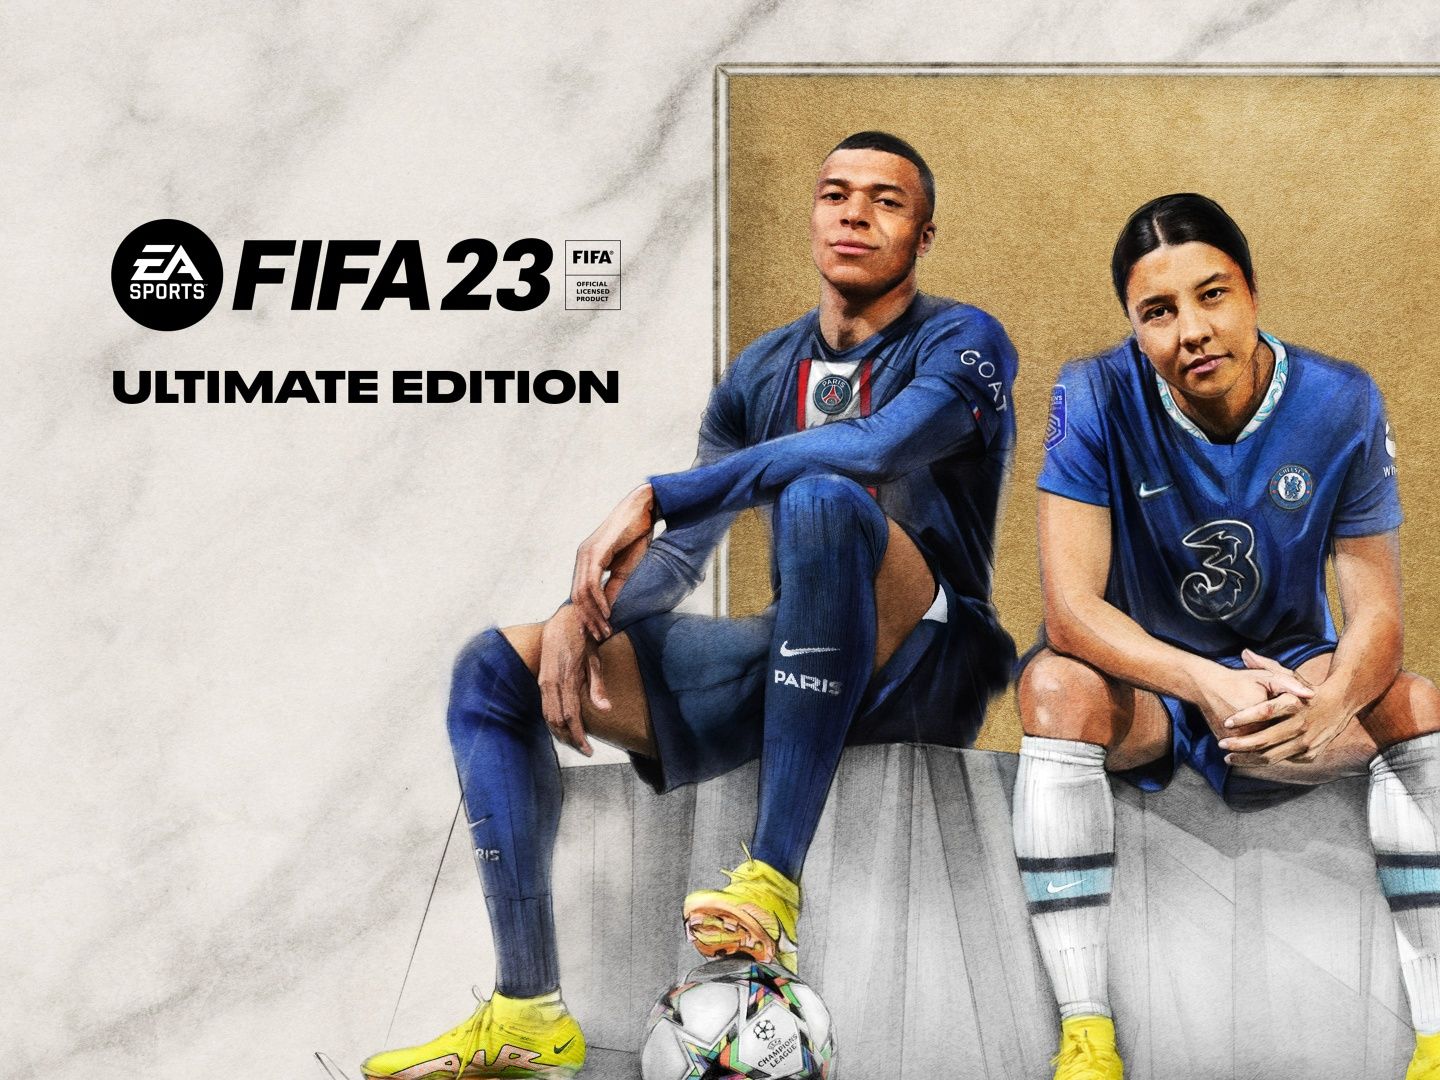 Show moat declare FIFA 23 Ultimate Sony PS4 PS5 Rosu • OLX.ro